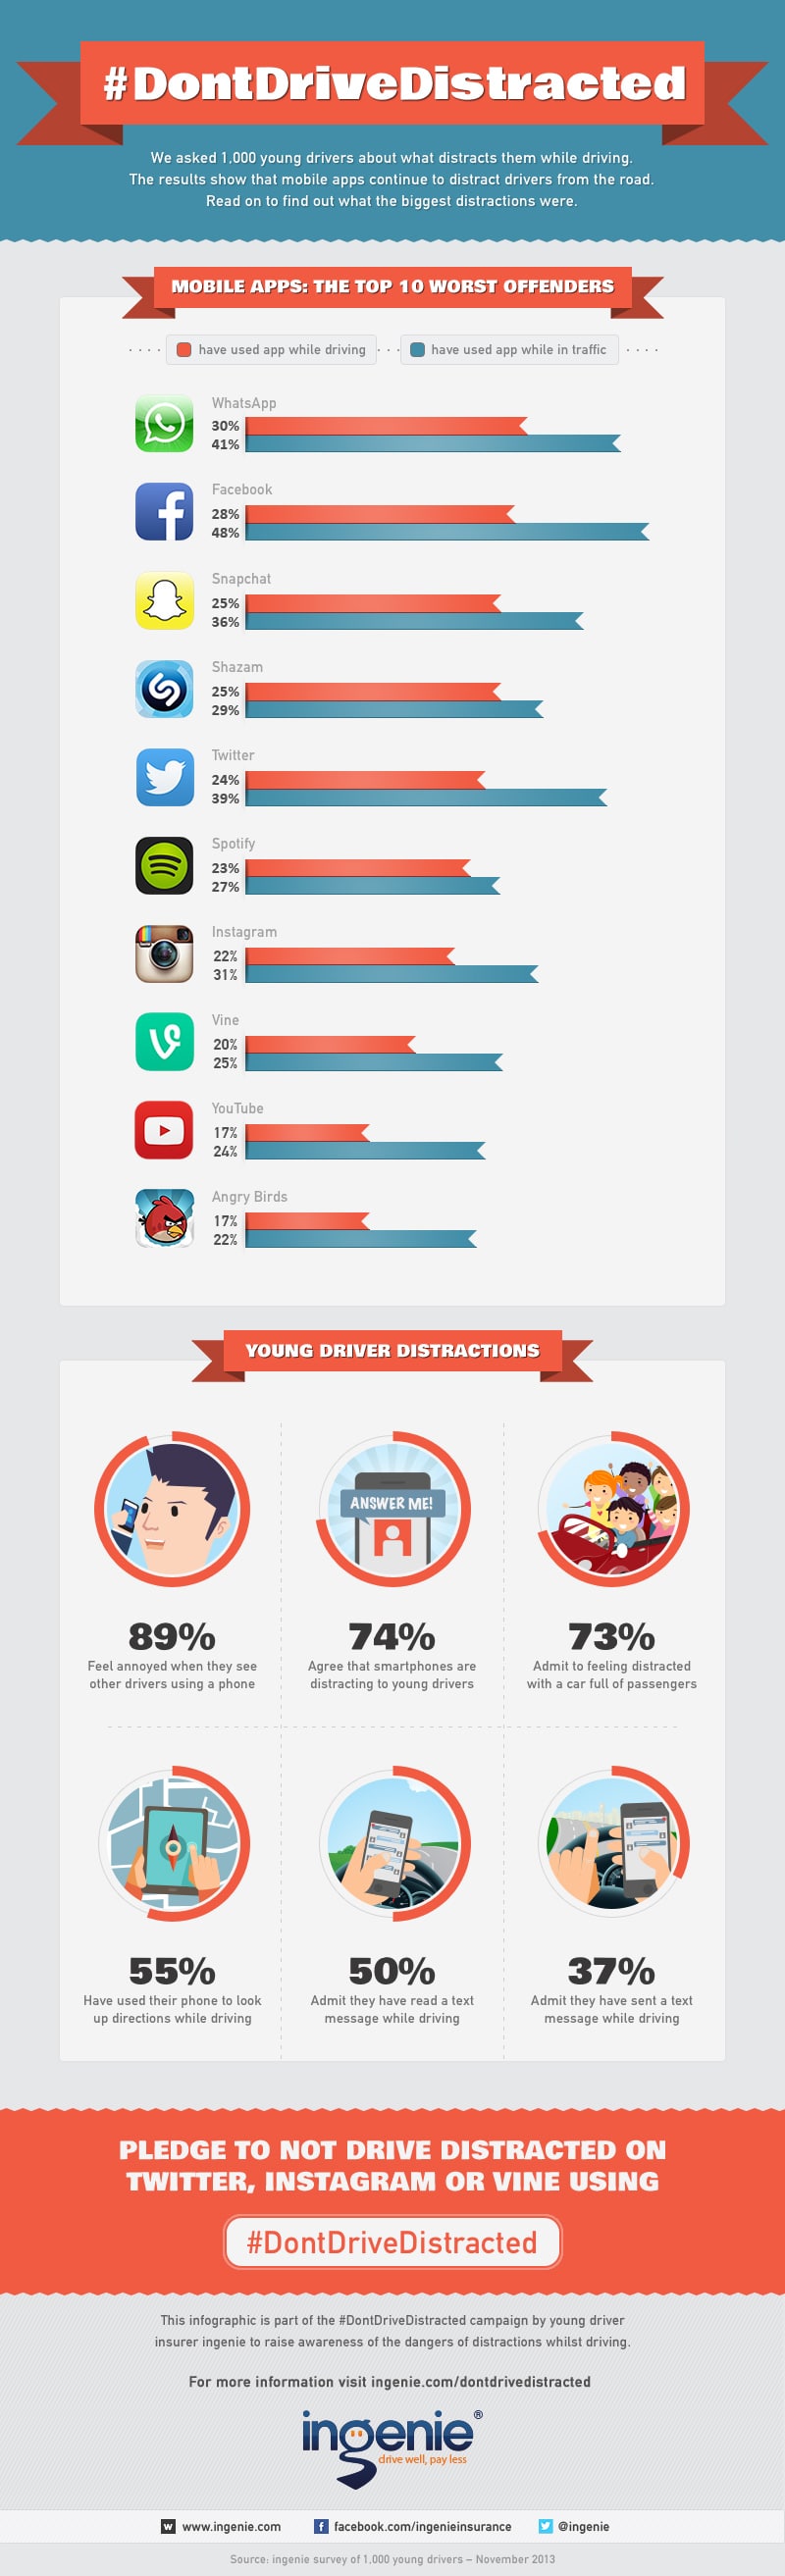 10 Most Distracting Smartphone Apps When Driving [Infographic]